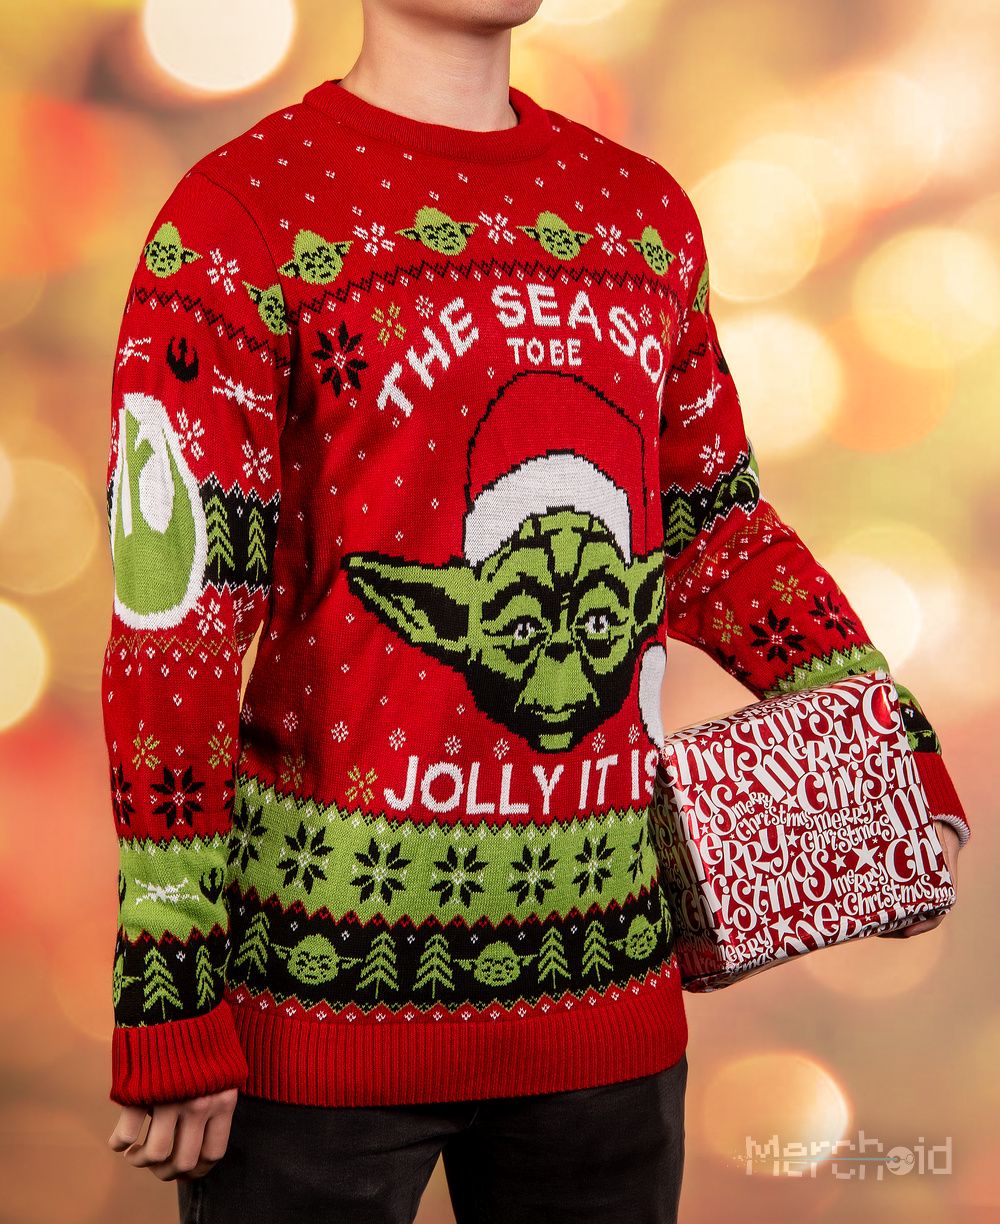 SW The Season To Be Jolly It Is Christmas Sweater/Jumper 2